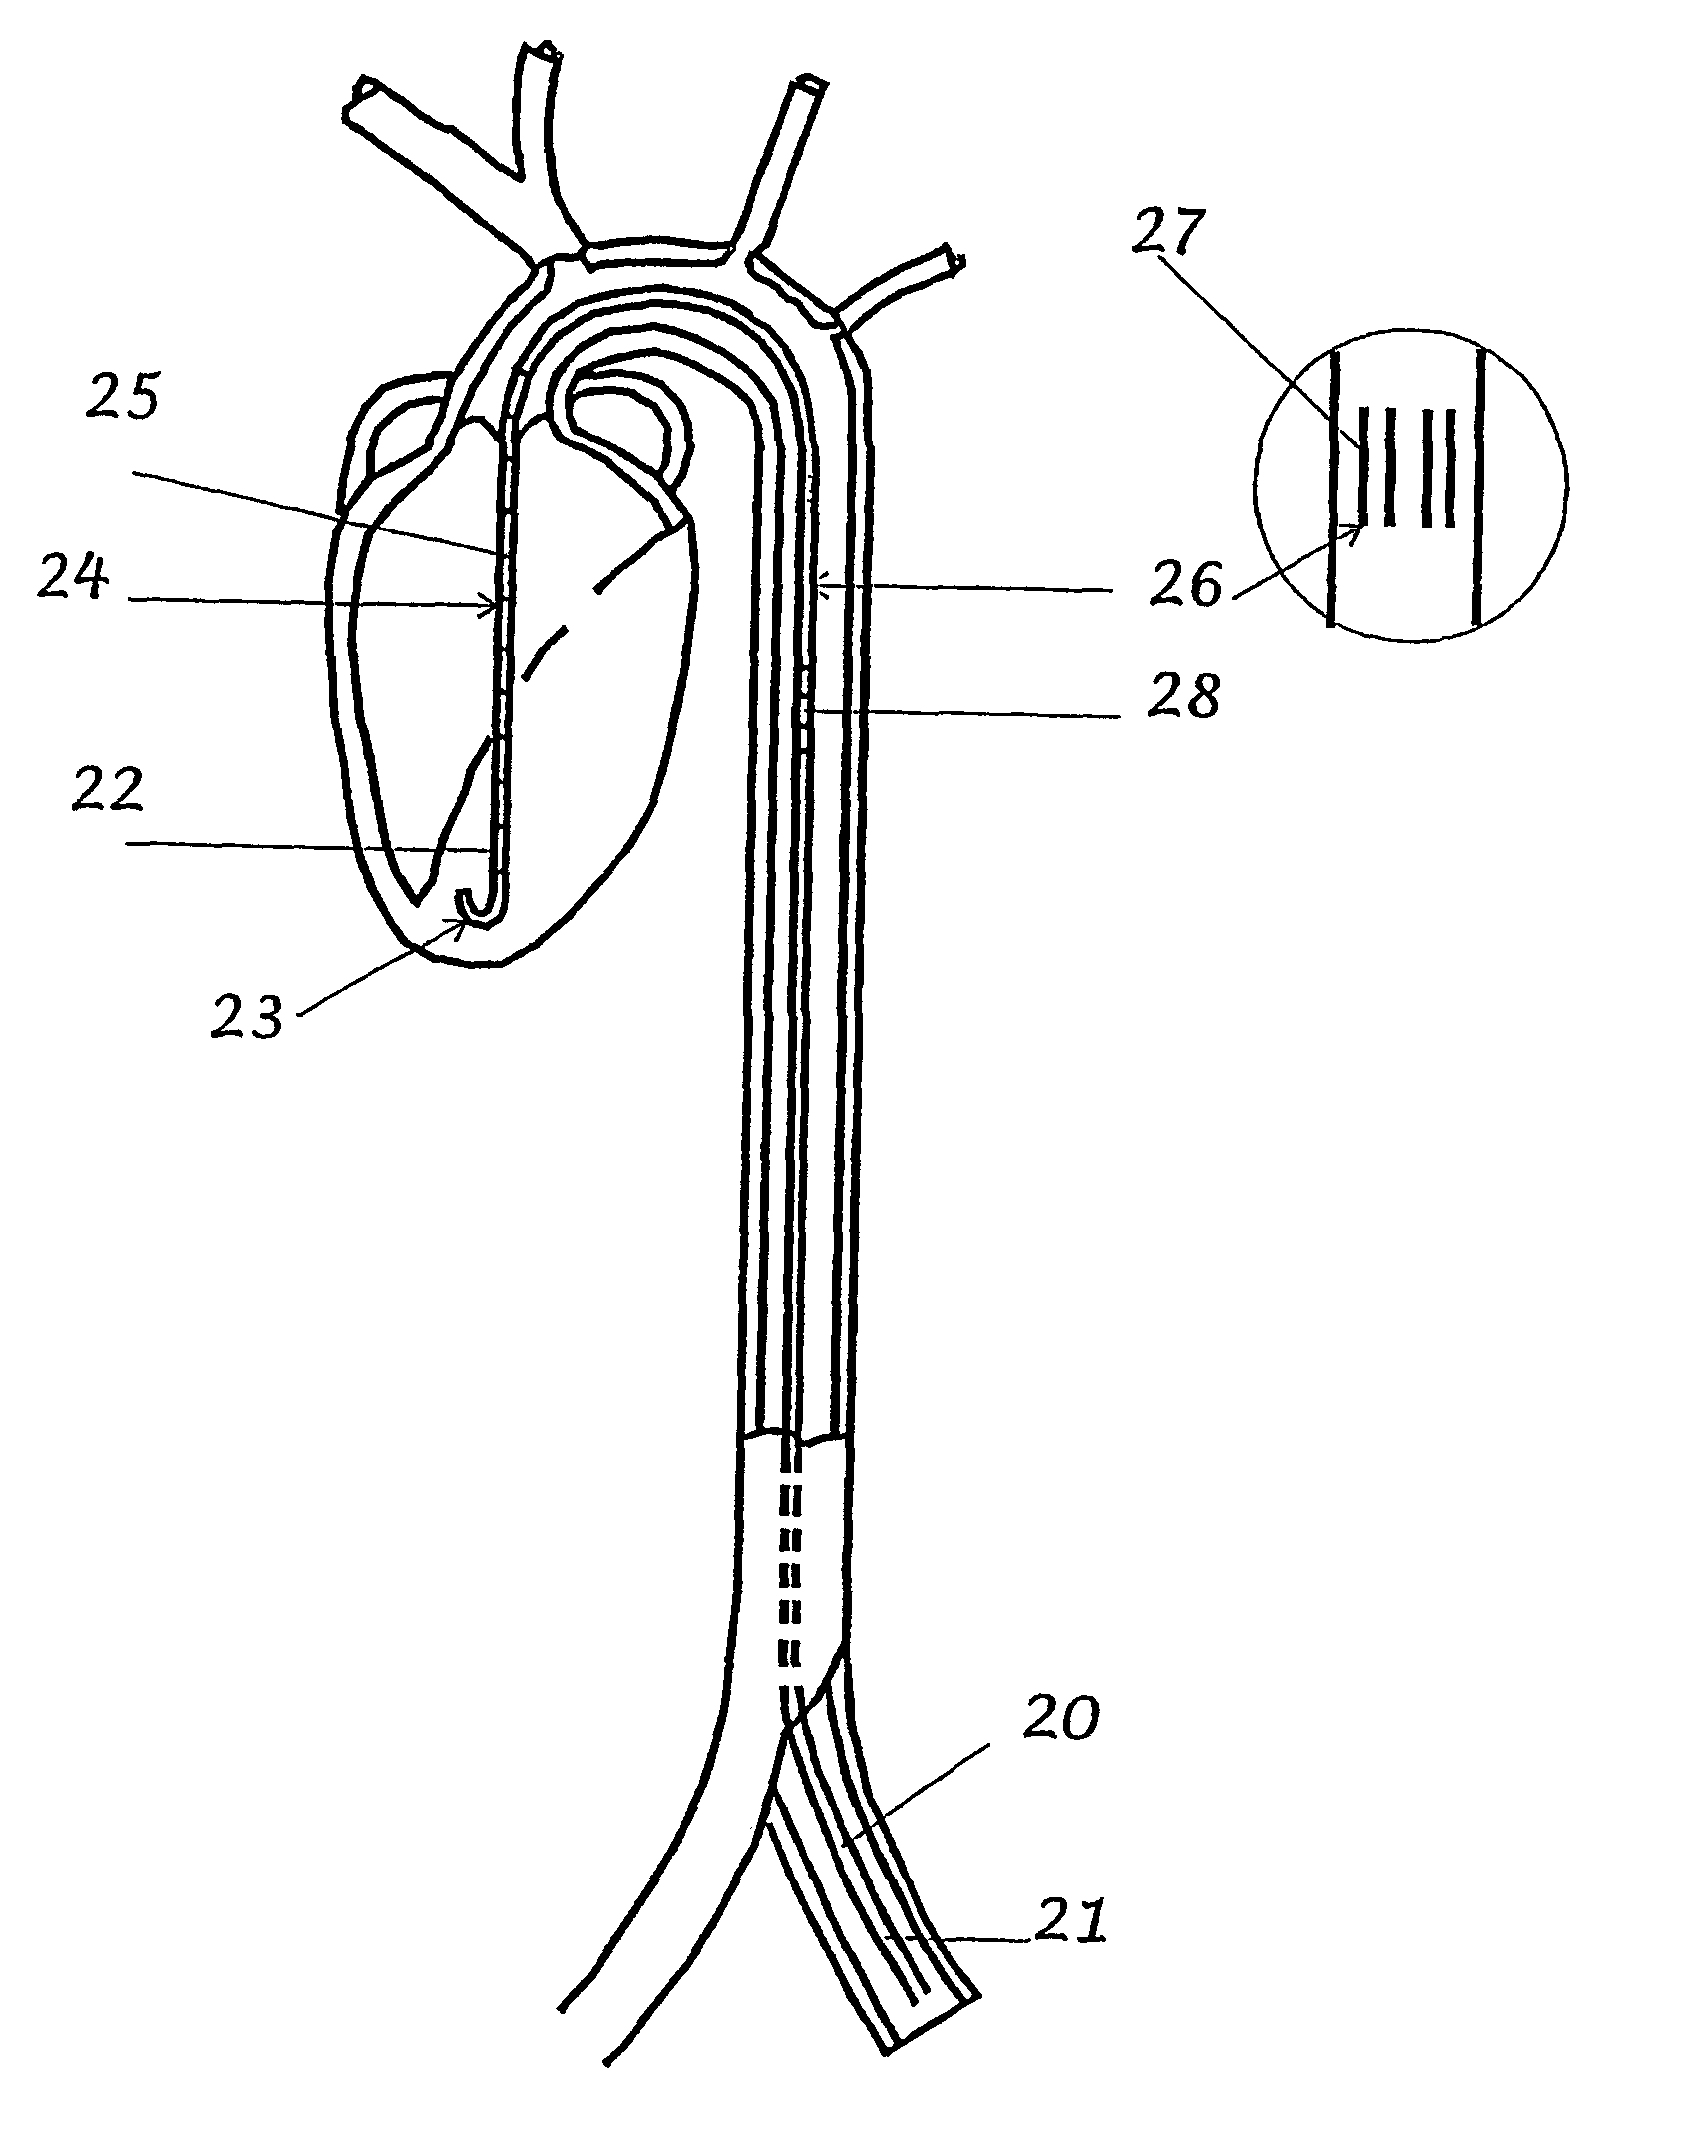 Method and device for determining the segmental volume and electrical parallel conductance of a cardiac chamber or blood vessel